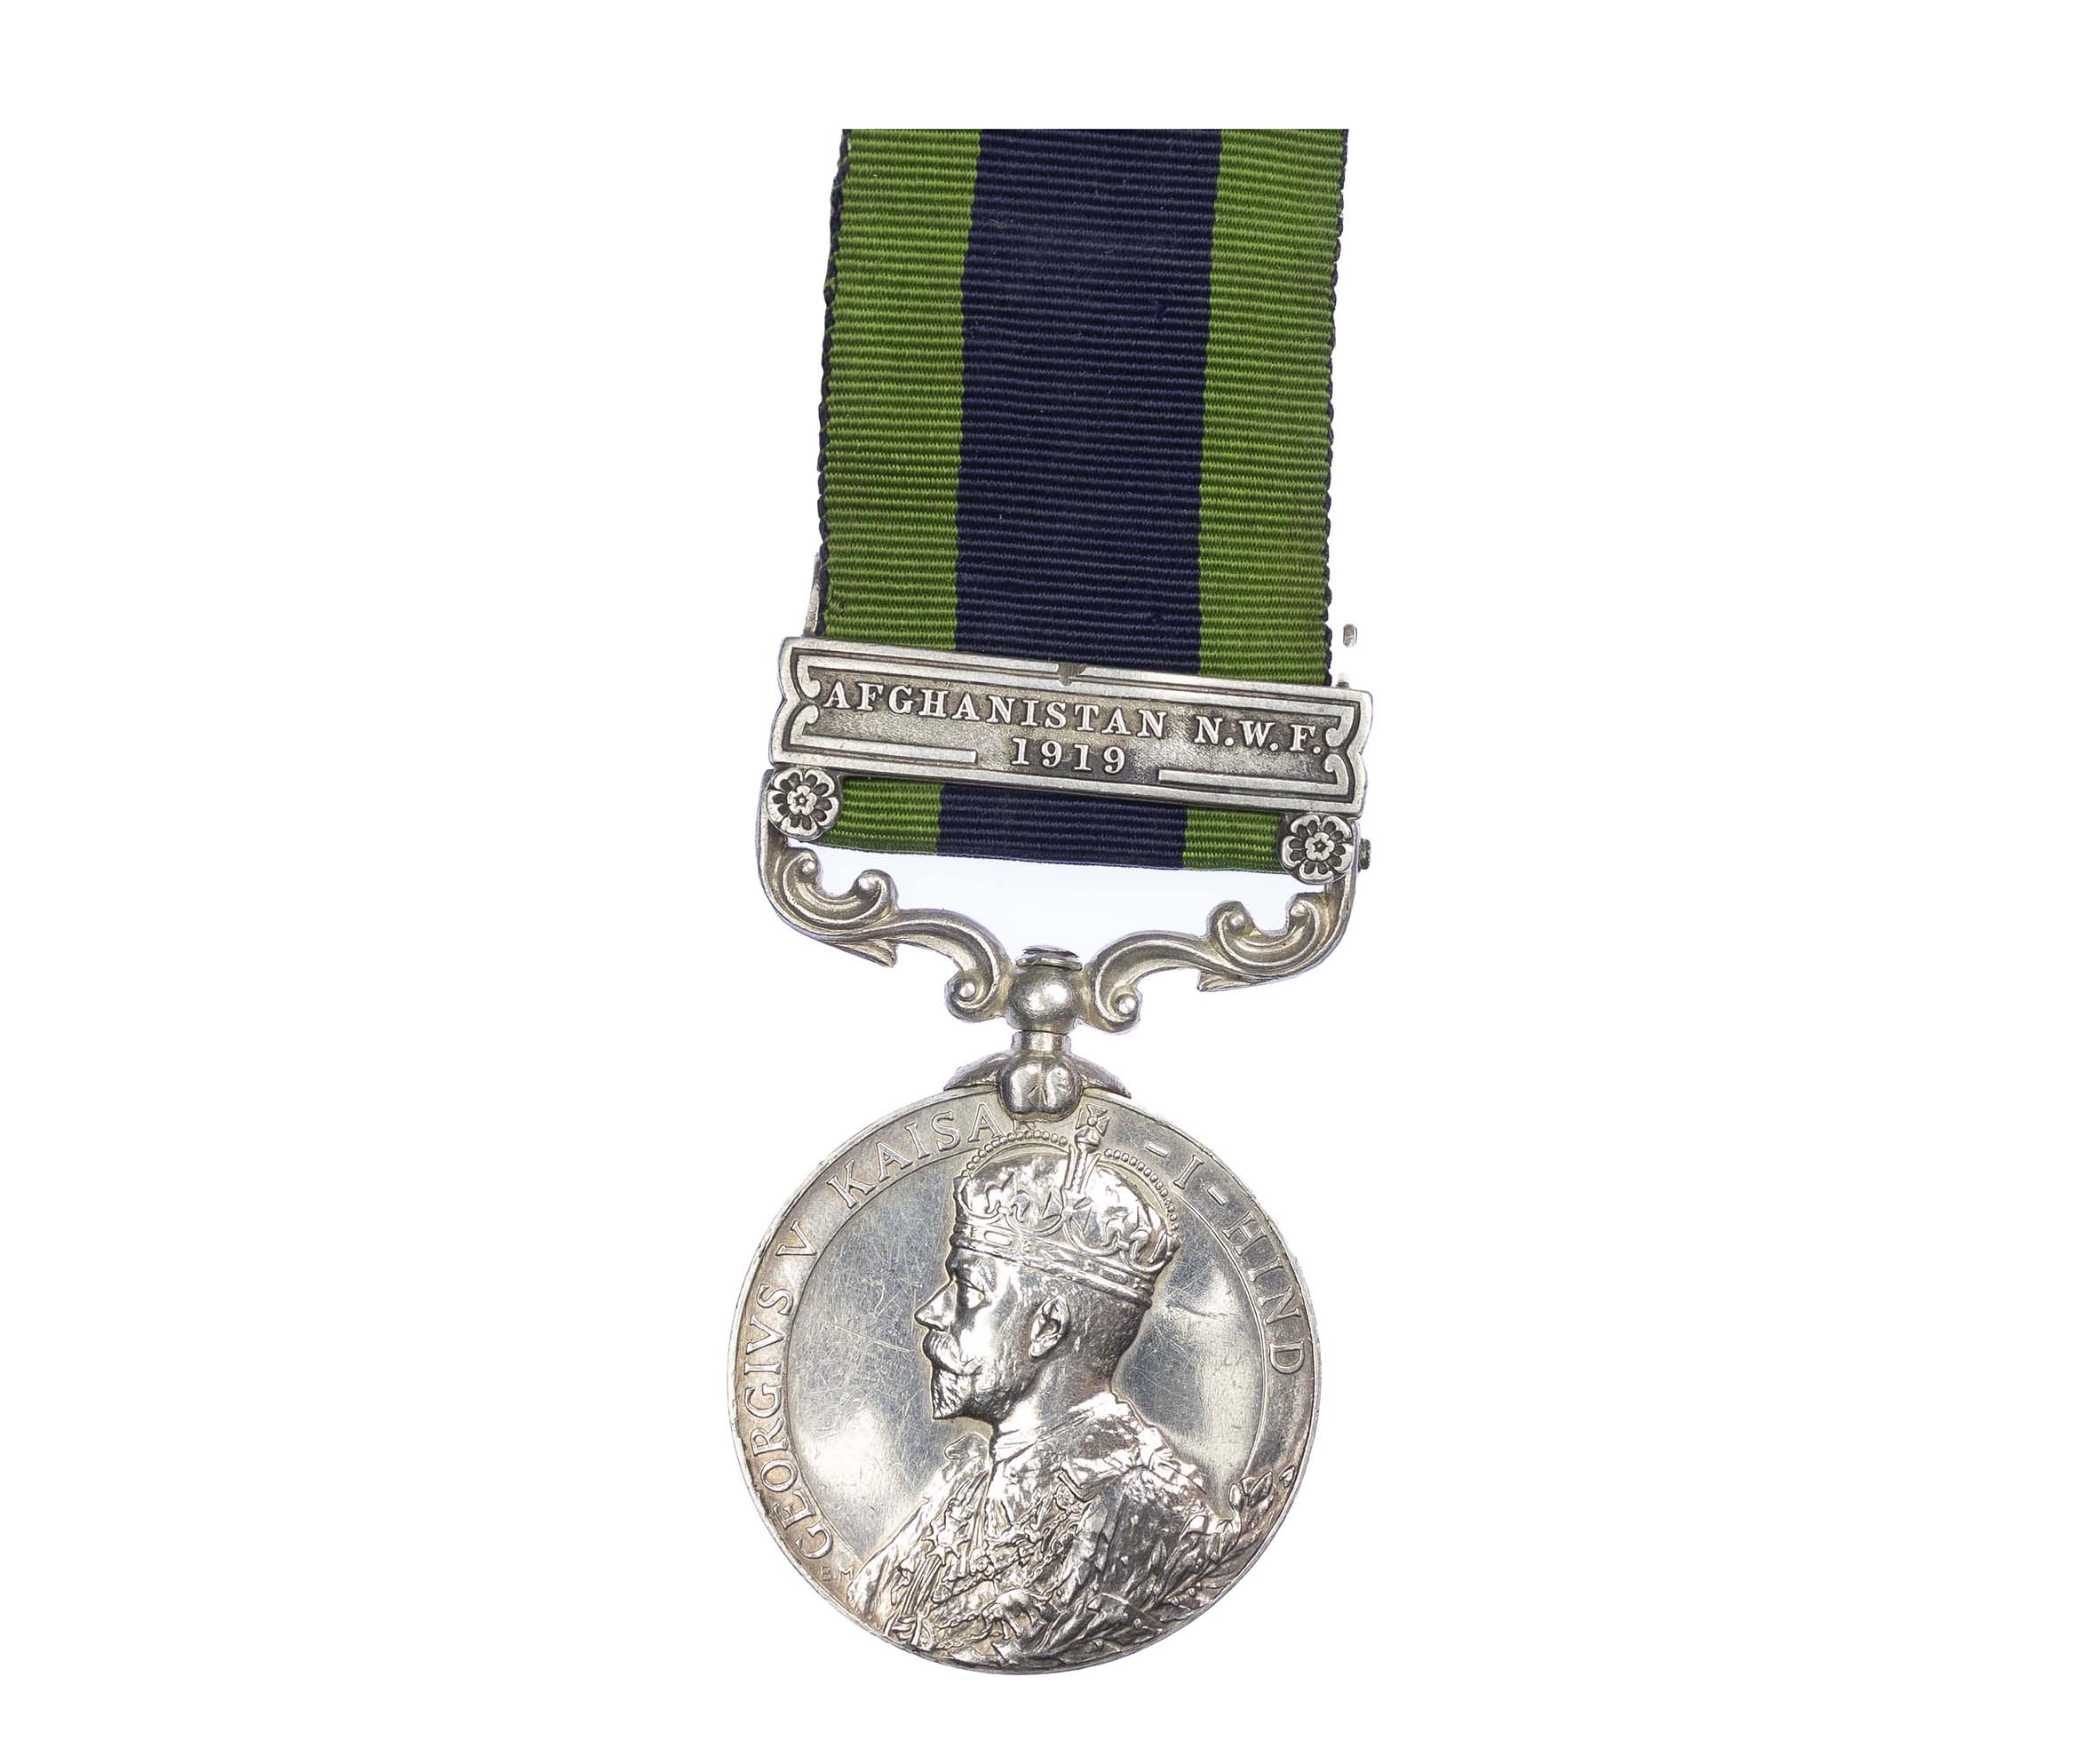 India General Service Medal 1908-1935, GVR, one clasp Afghanistan N.W.F. 1919, to Rifleman Subir Lama